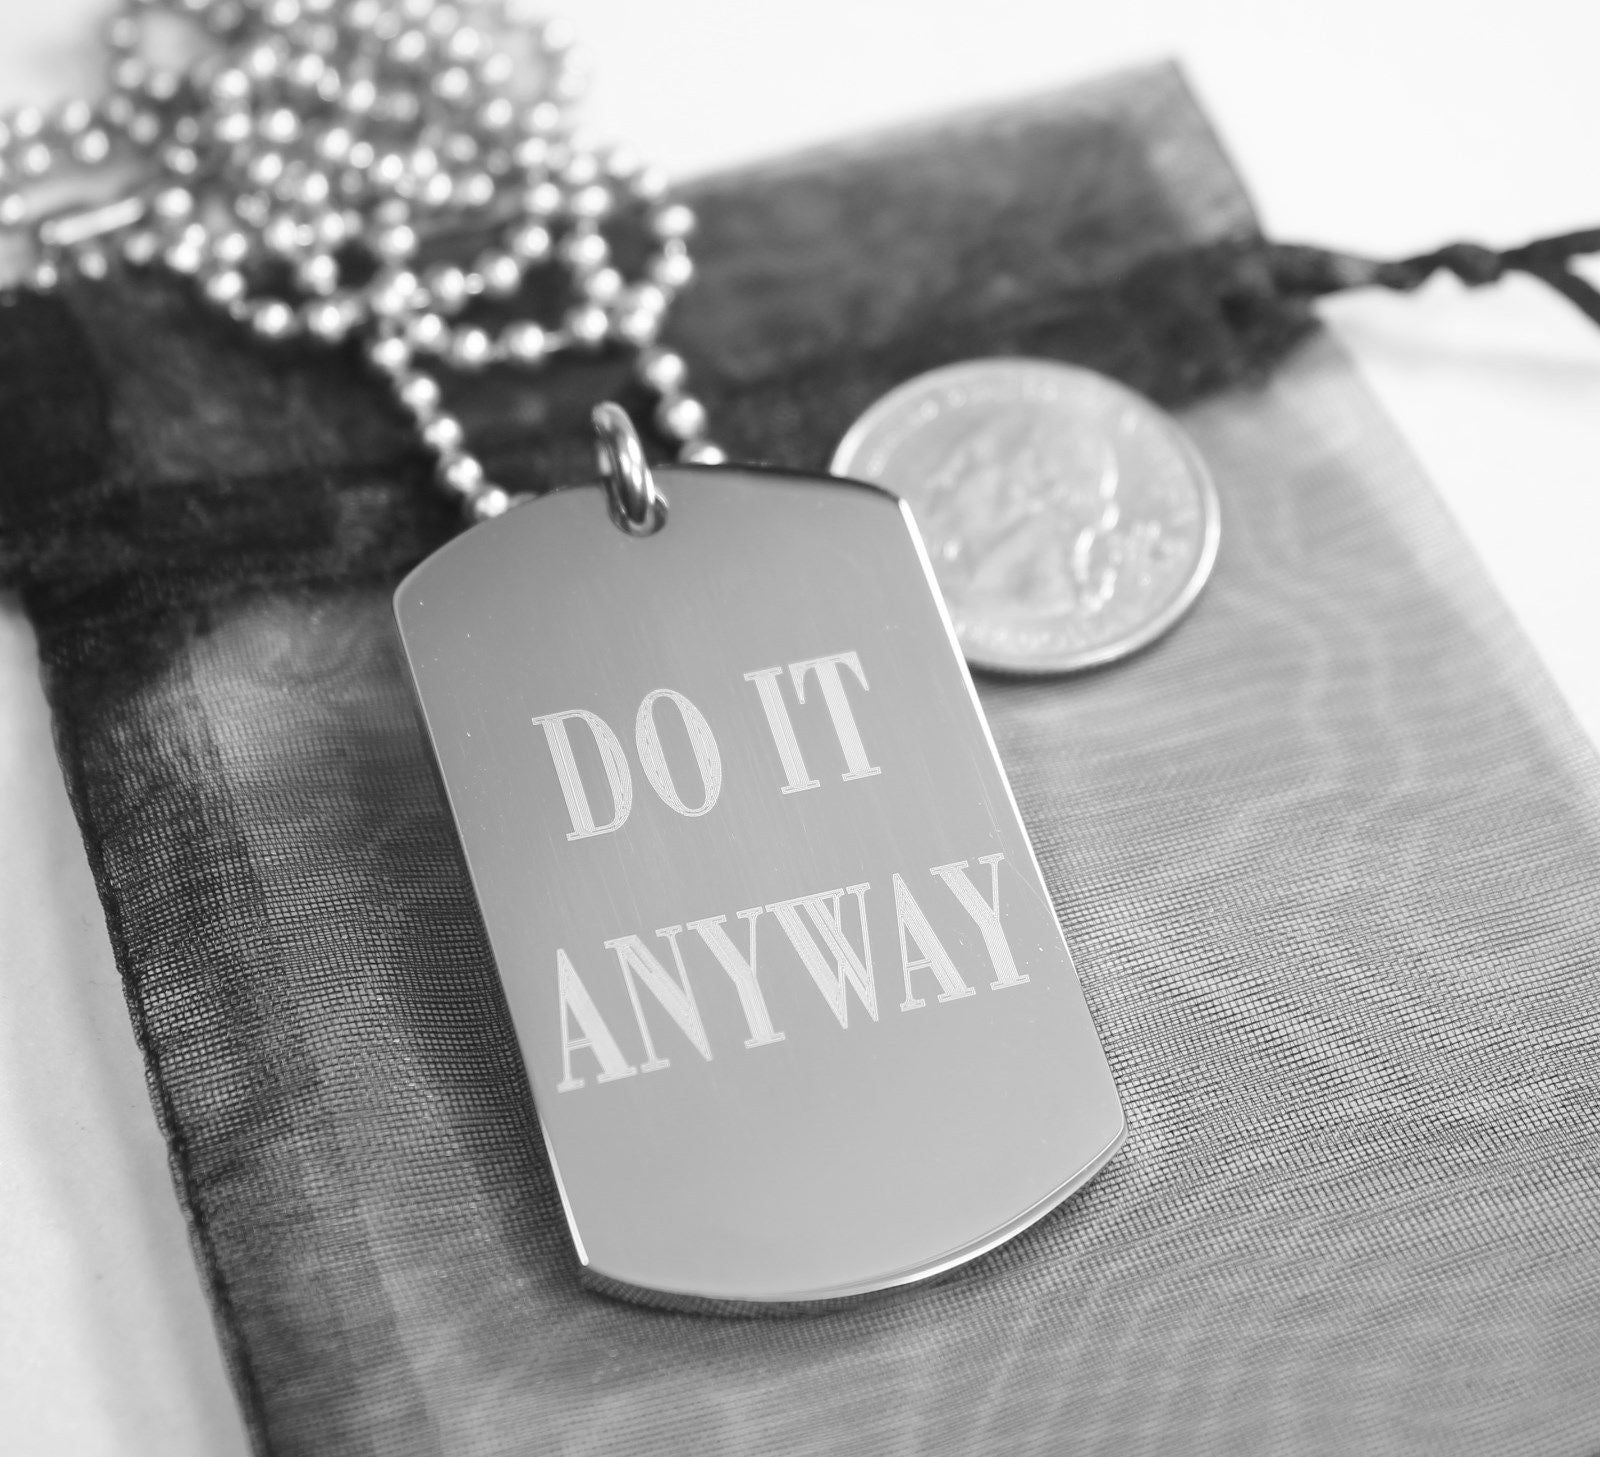 PRAYER NECKLACE MOTHER TERESA DO IT ANYWAY DOG TAG STAINLESS STEEL RELIGIOUS - Samstagsandmore